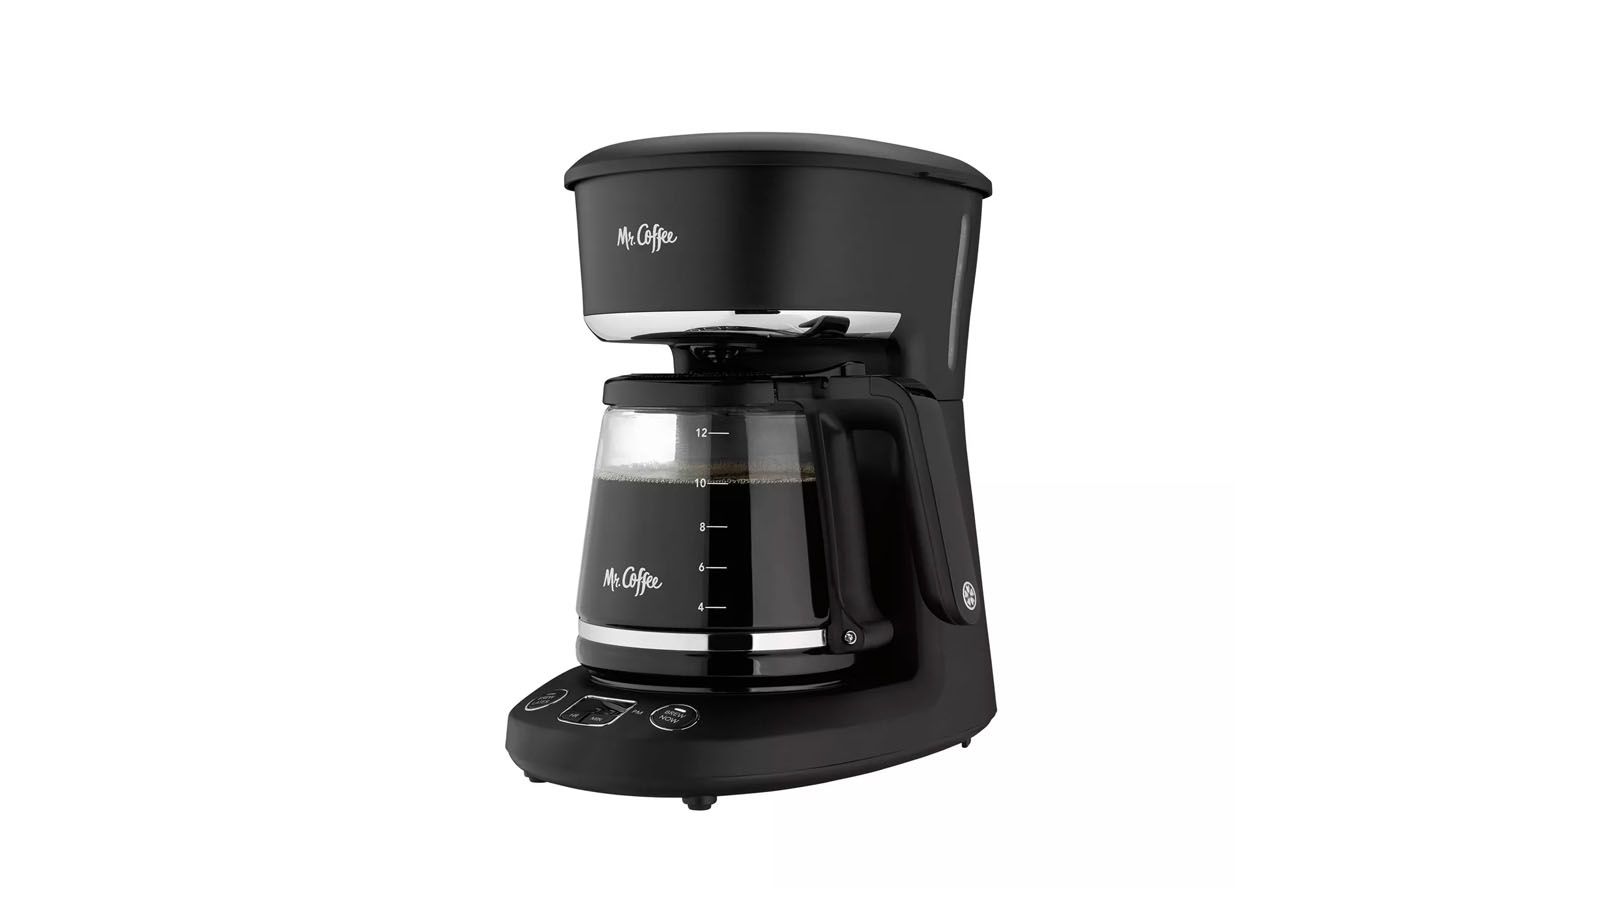 Mr Coffee 4 Cup Coffee Maker White AD4